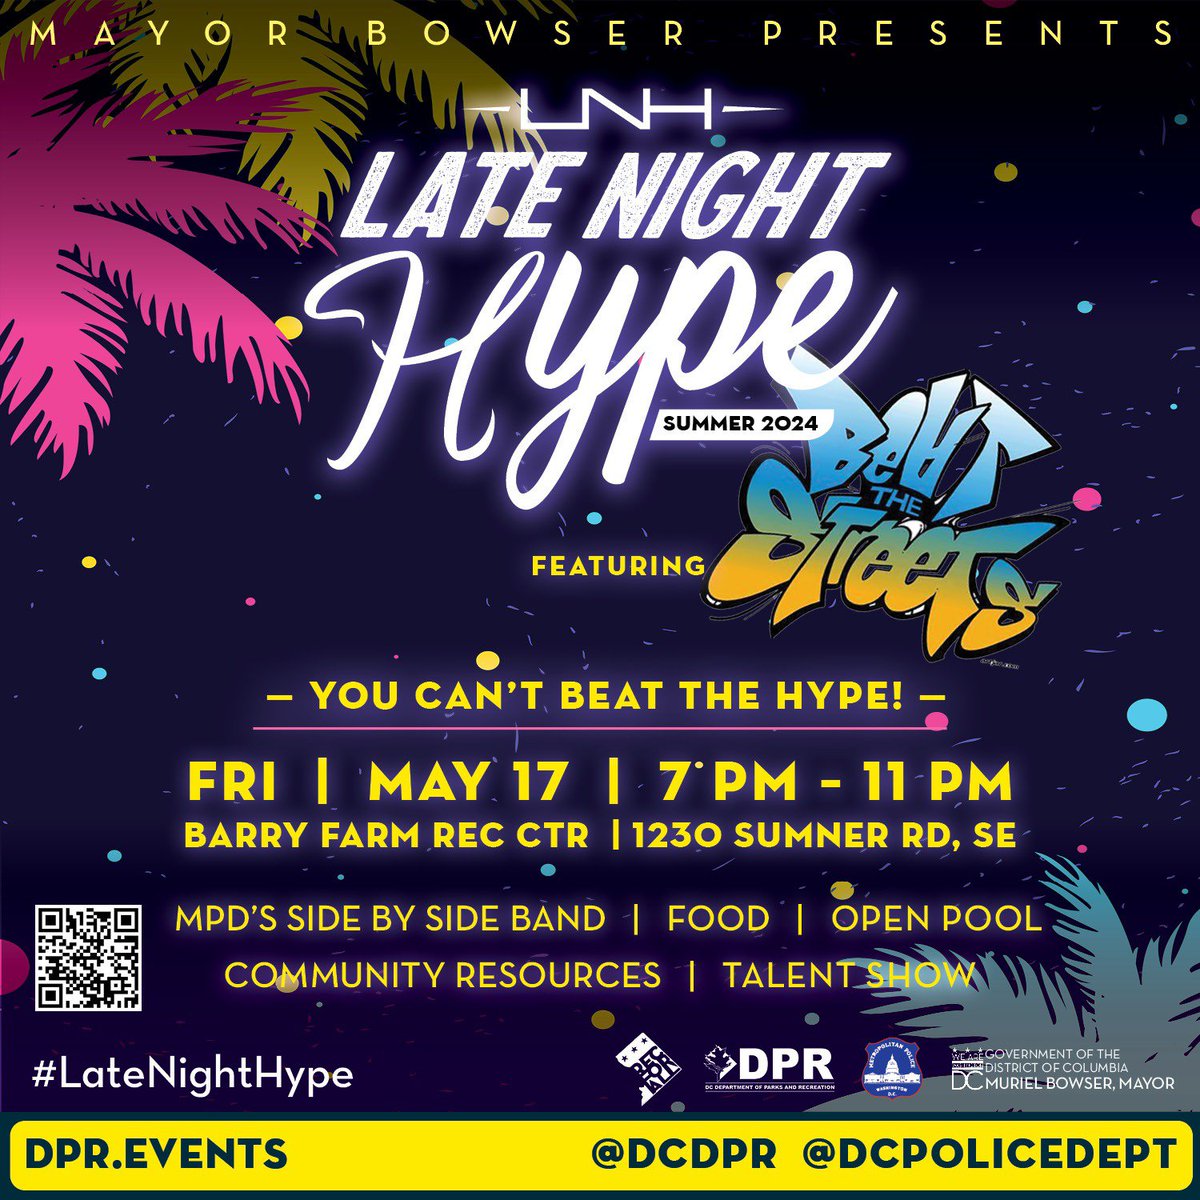 Late Night Hype is BACK👏🏾 From video games and free food to sports and live music, there's something for everyone to enjoy at @DCDPR's popular summertime series. Join us this Friday and all summer long➡️latenighthype.splashthat.com